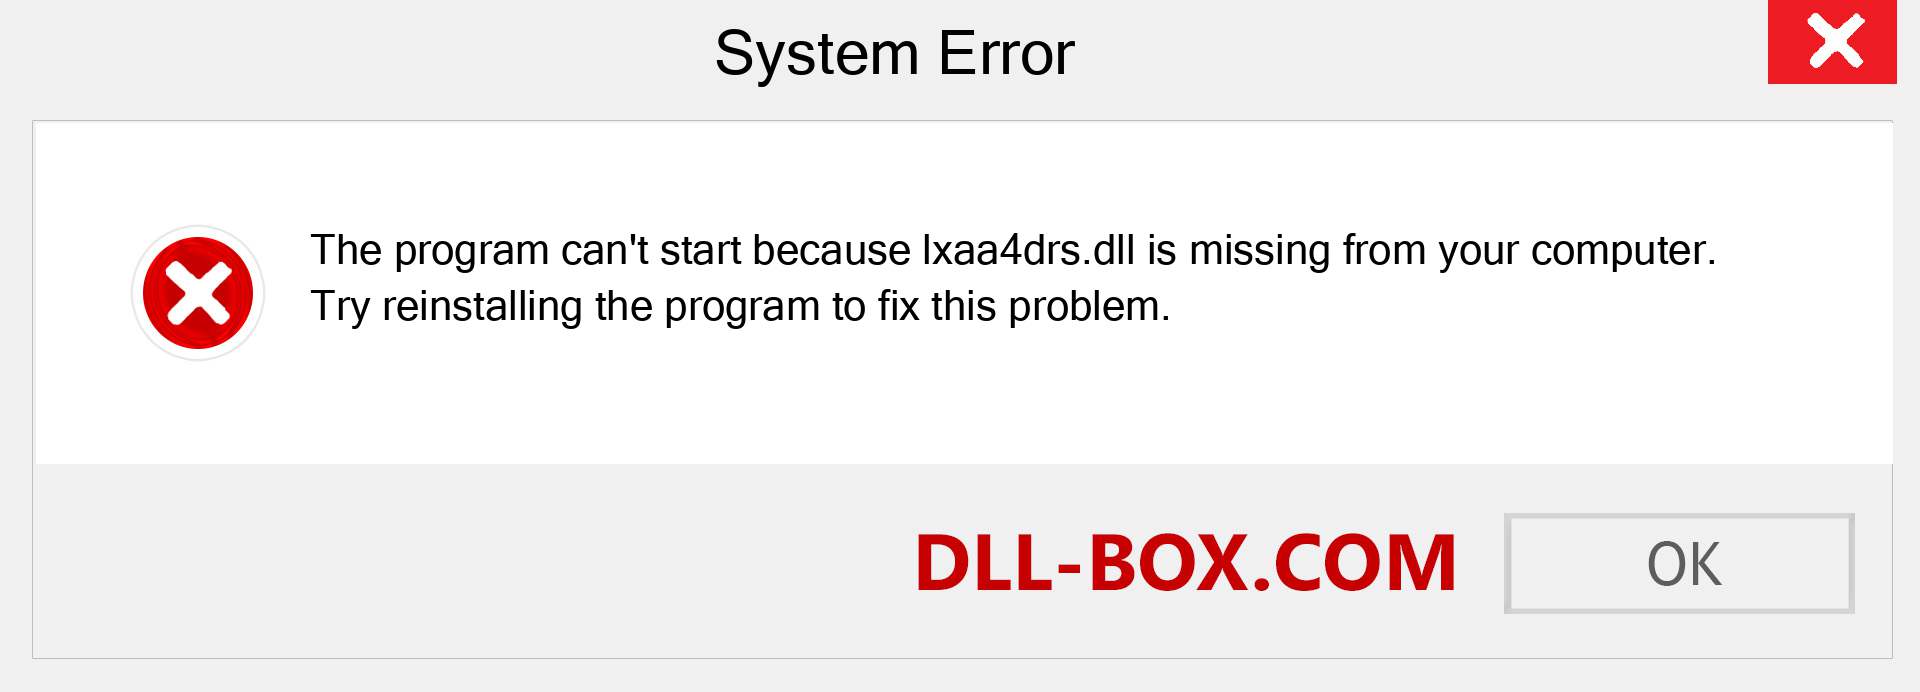  lxaa4drs.dll file is missing?. Download for Windows 7, 8, 10 - Fix  lxaa4drs dll Missing Error on Windows, photos, images